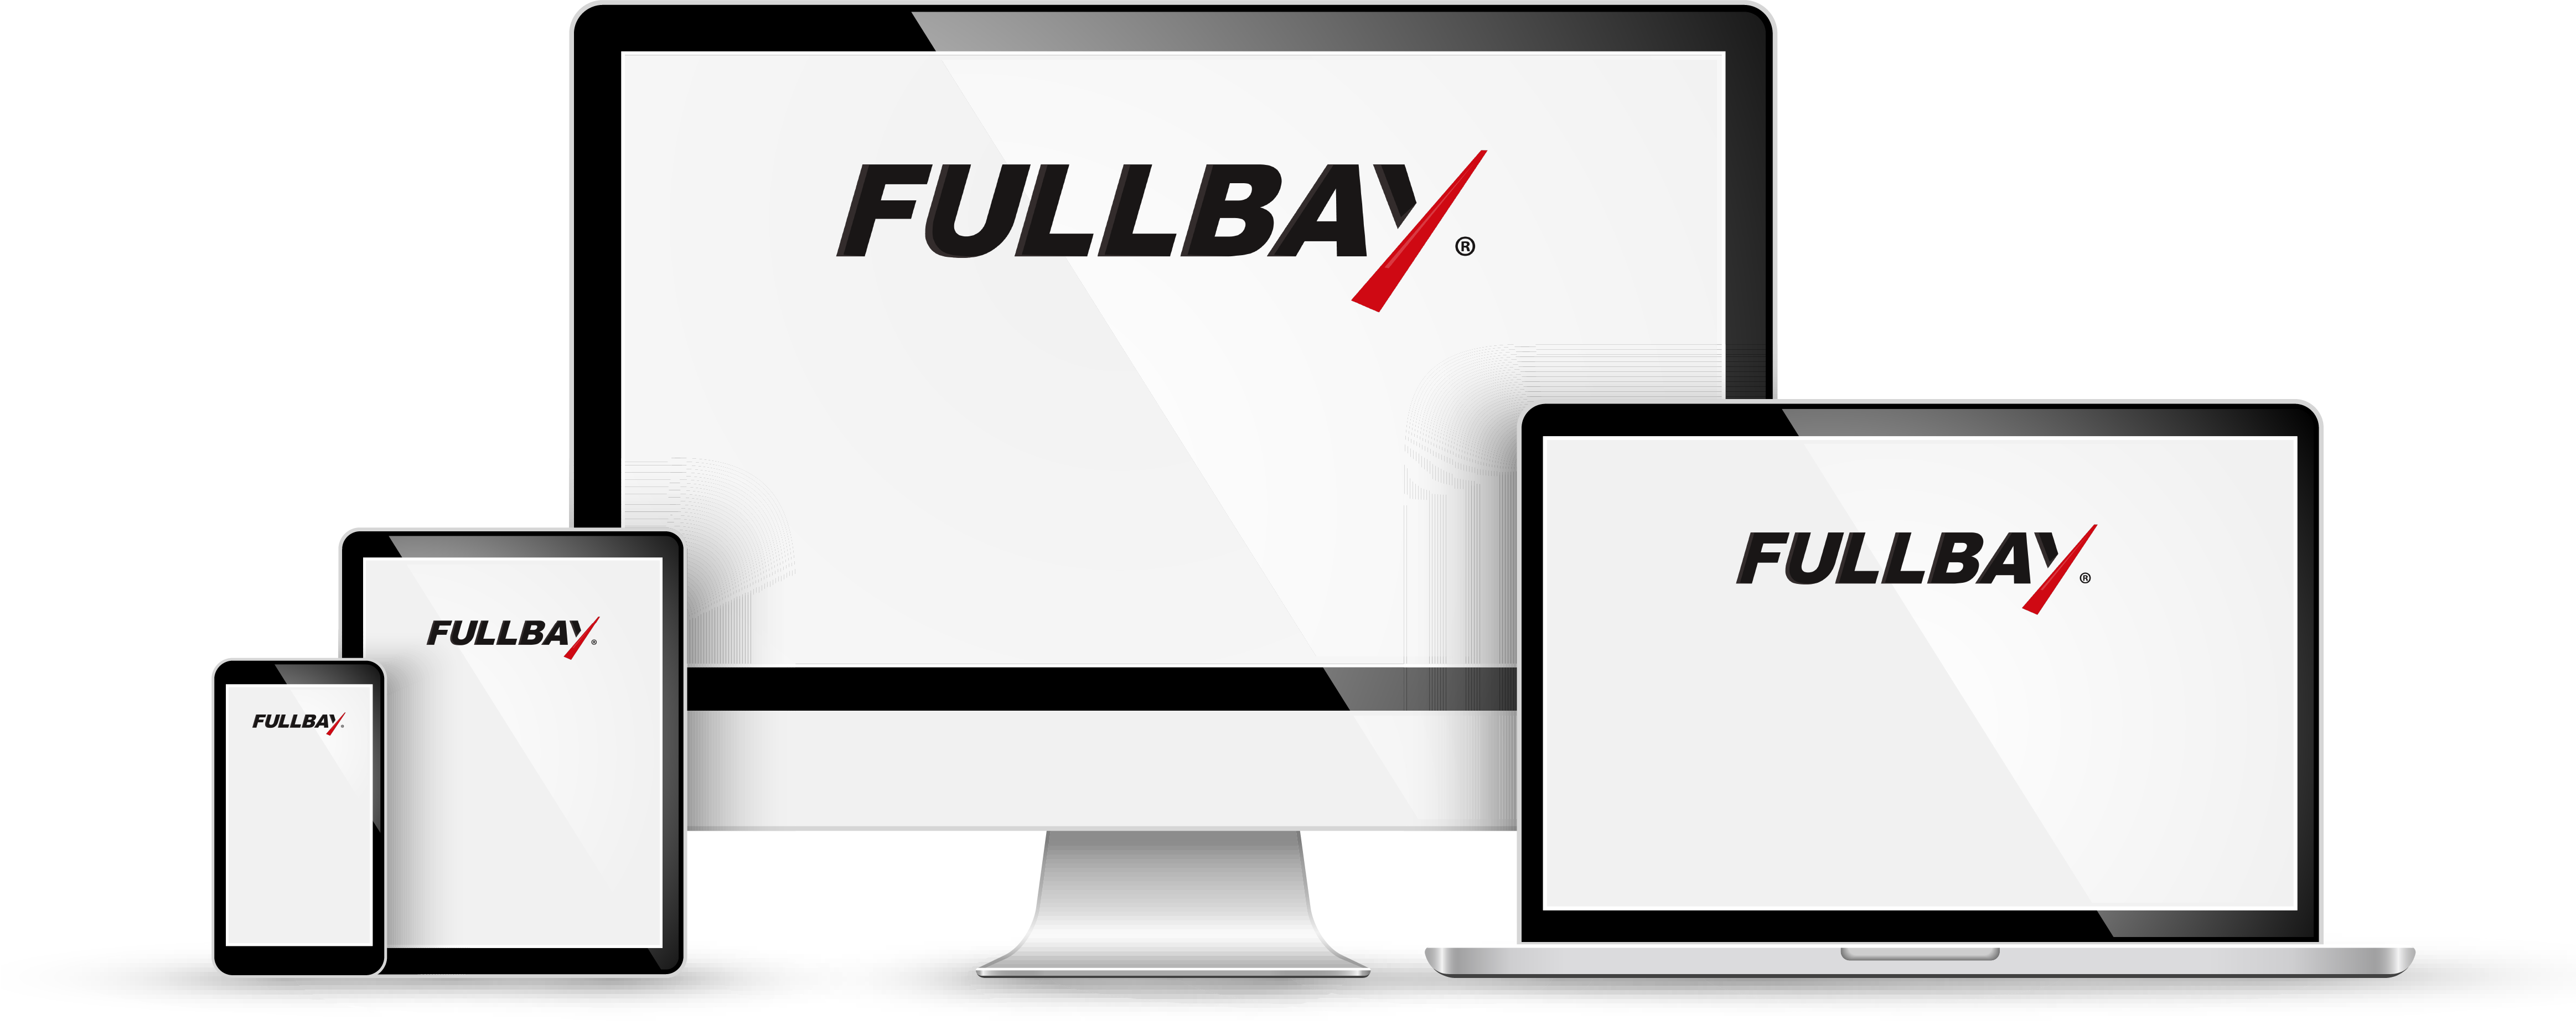 Fullbay Software - Hosted and deployed within the cloud, Fullbay is accessible on any internet-enabled device including mobile, tablet, desktop or laptop